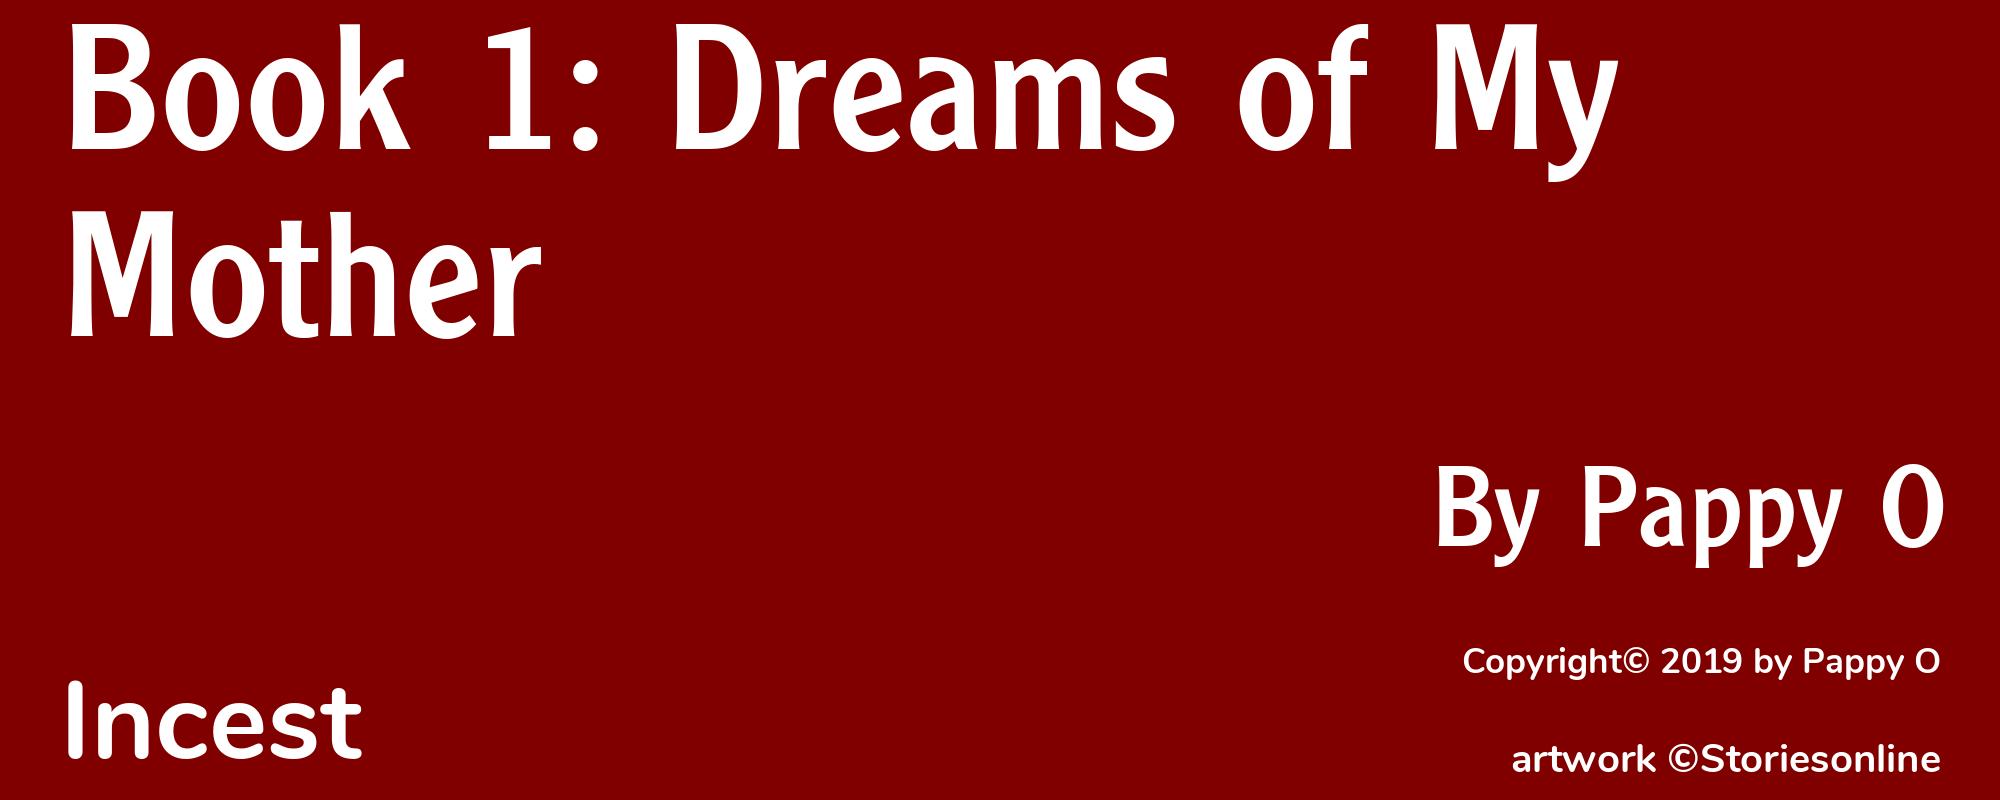 Book 1: Dreams of My Mother - Cover